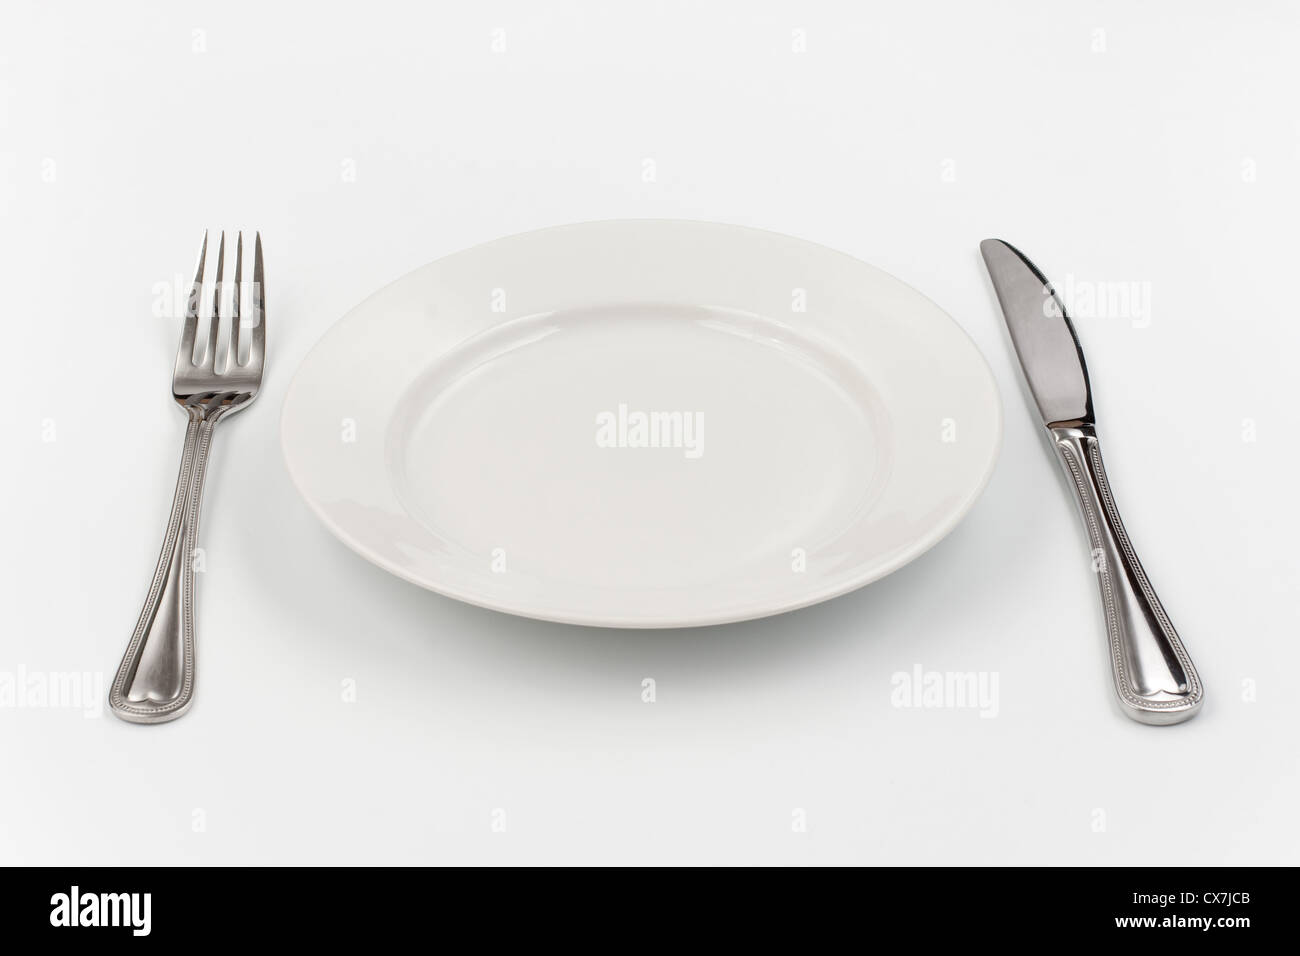 Place setting for one person. Knife, white plate and fork. Stock Photo